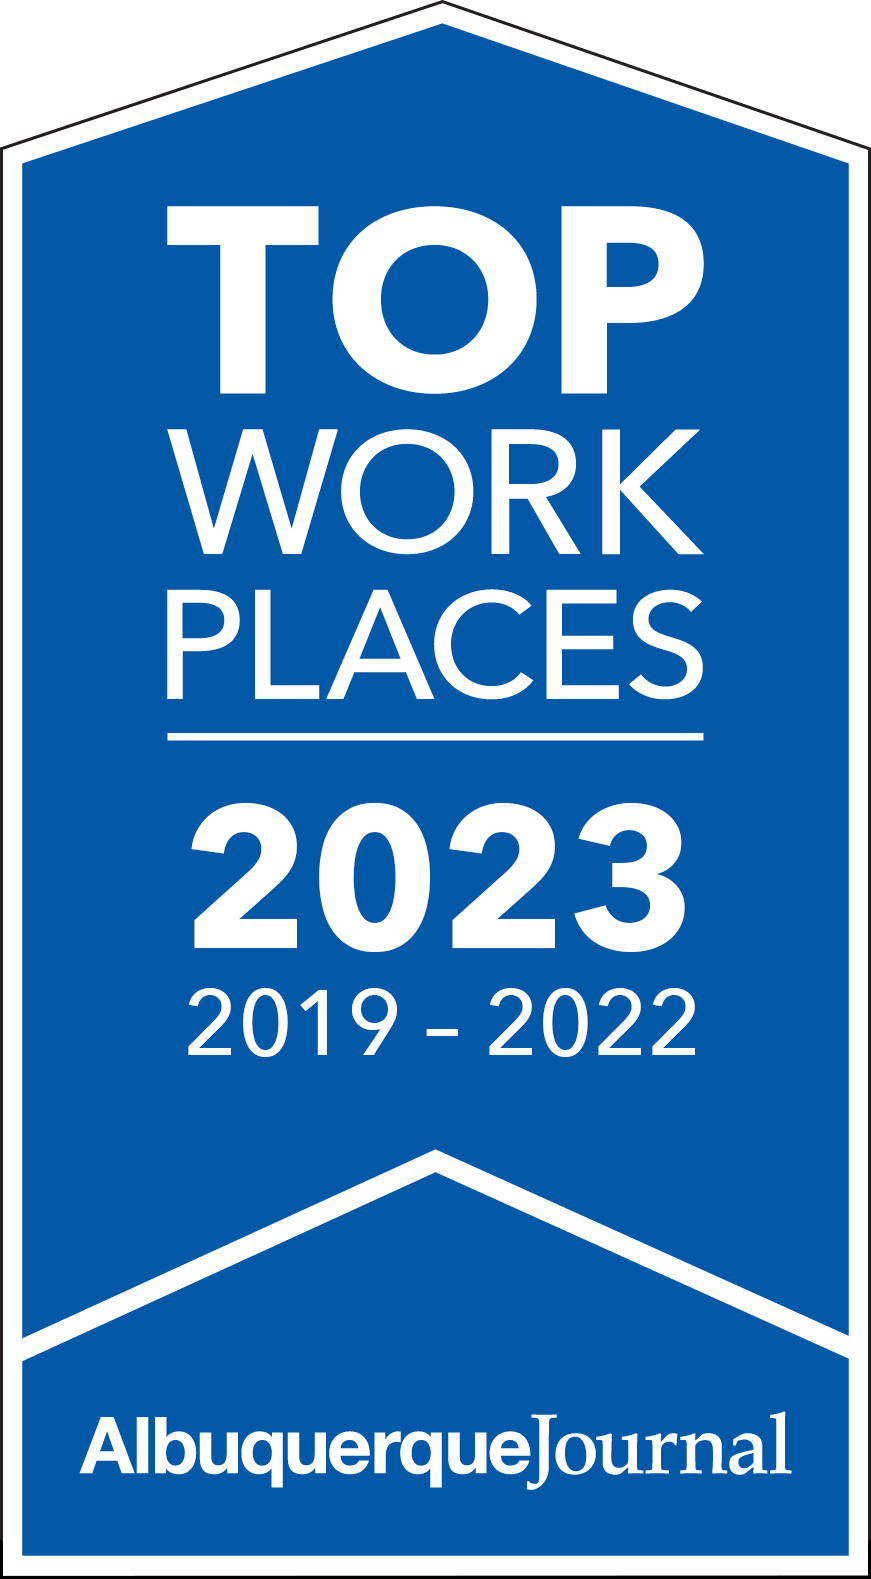 Albuquerque Journal Top Work Places 2019, 2020 and 2021